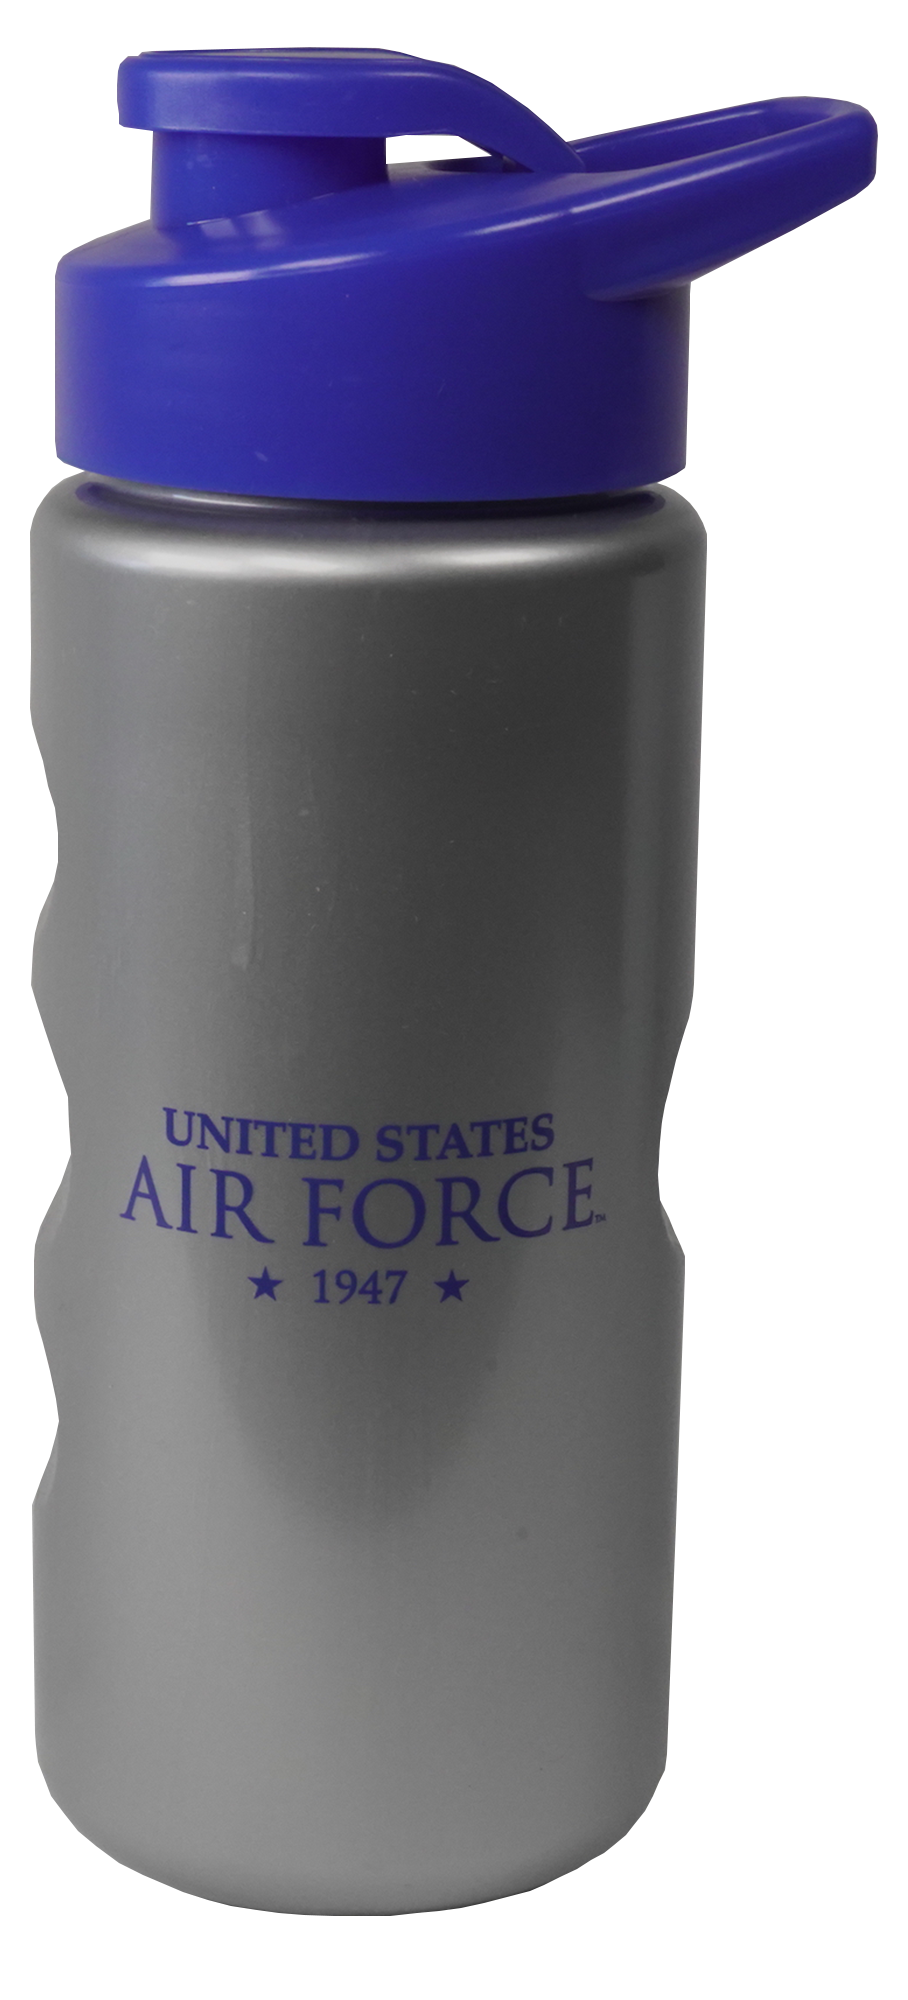 United States Air Force 1947 on 22 oz. Plastic Bottle